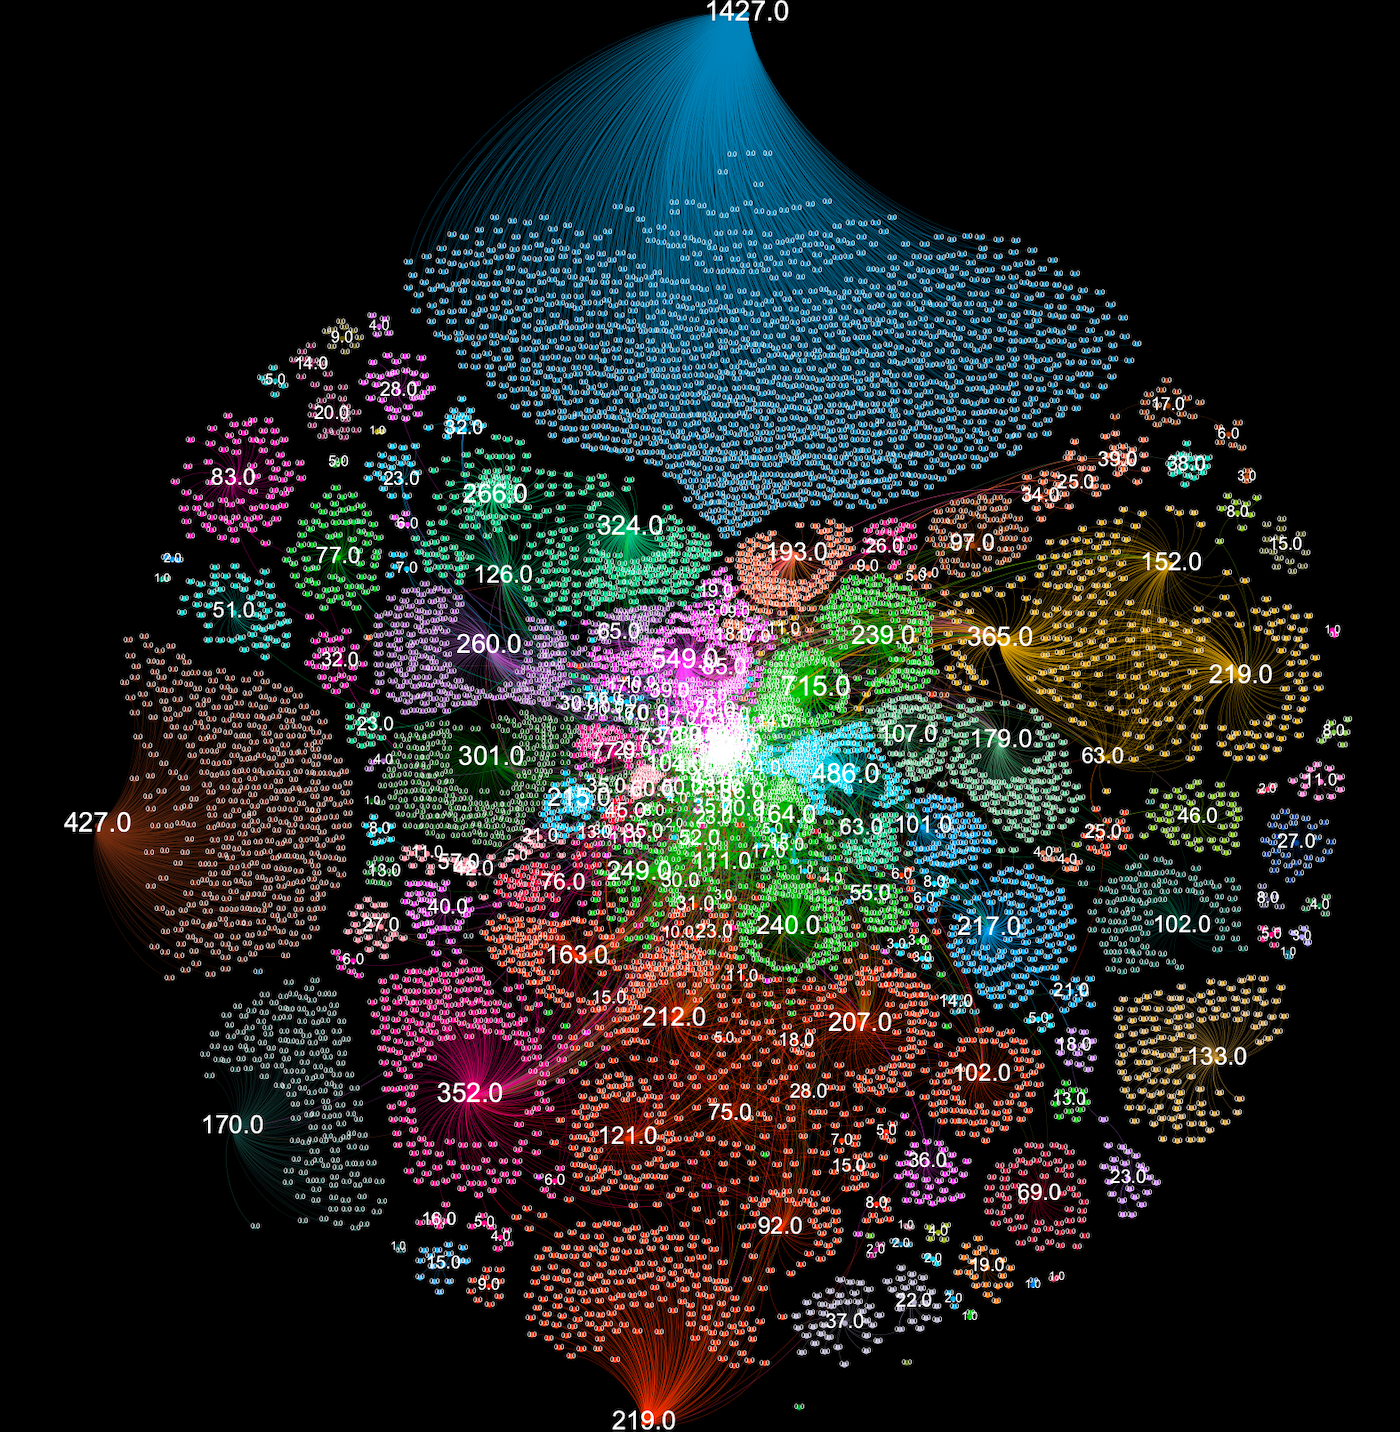 A node-edge graph of channel interactions captured in one of the Tether datasets, showing that many of the videos received comments from completely separate groups of accounts, with activity in the center of the graph showing overlap between commenters .